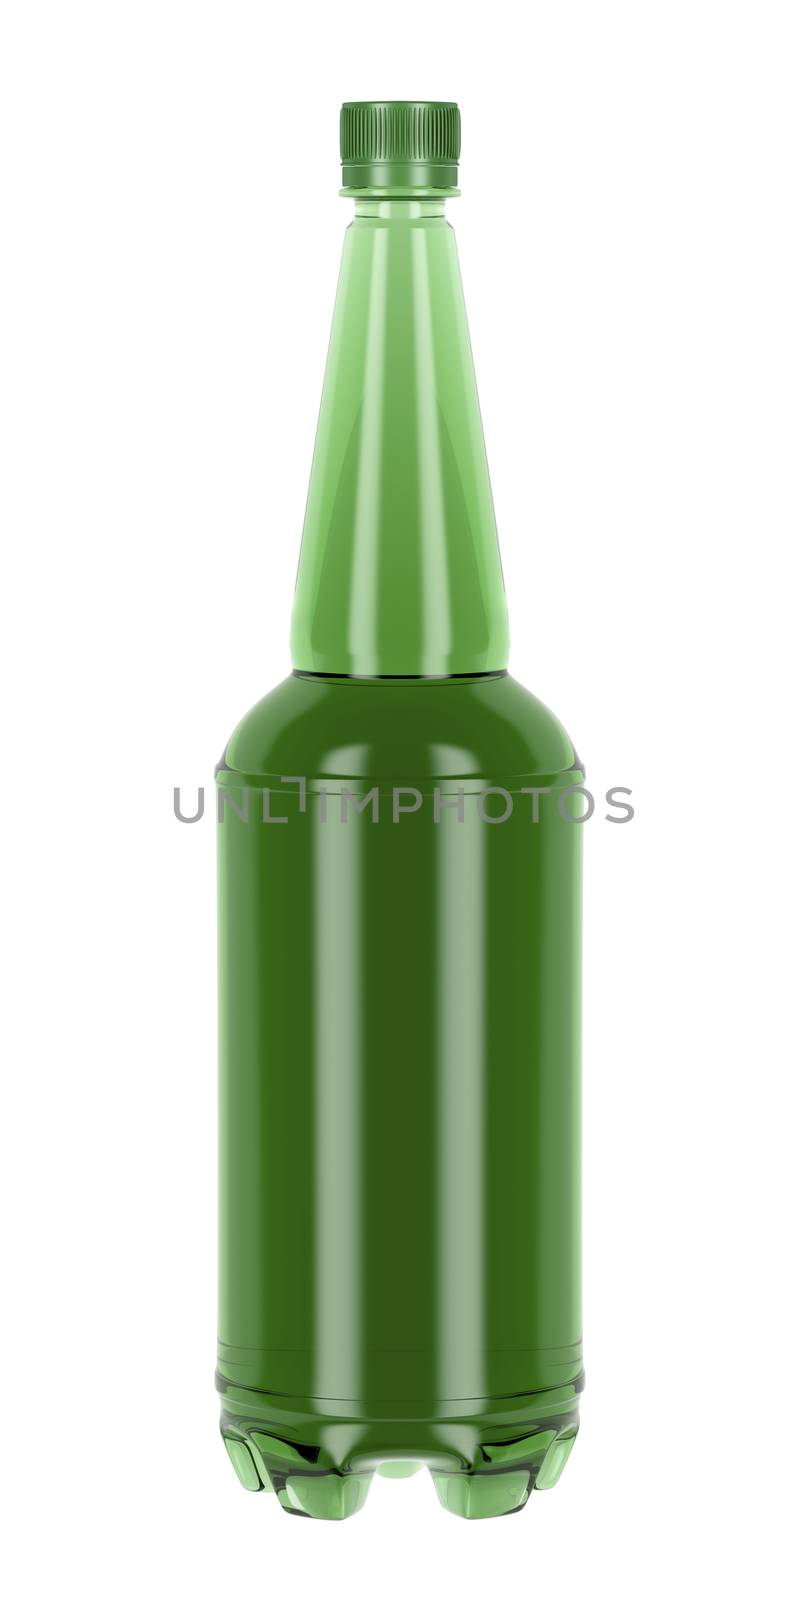 Green plastic bottle for beer, soda or other beverages isolated on white background